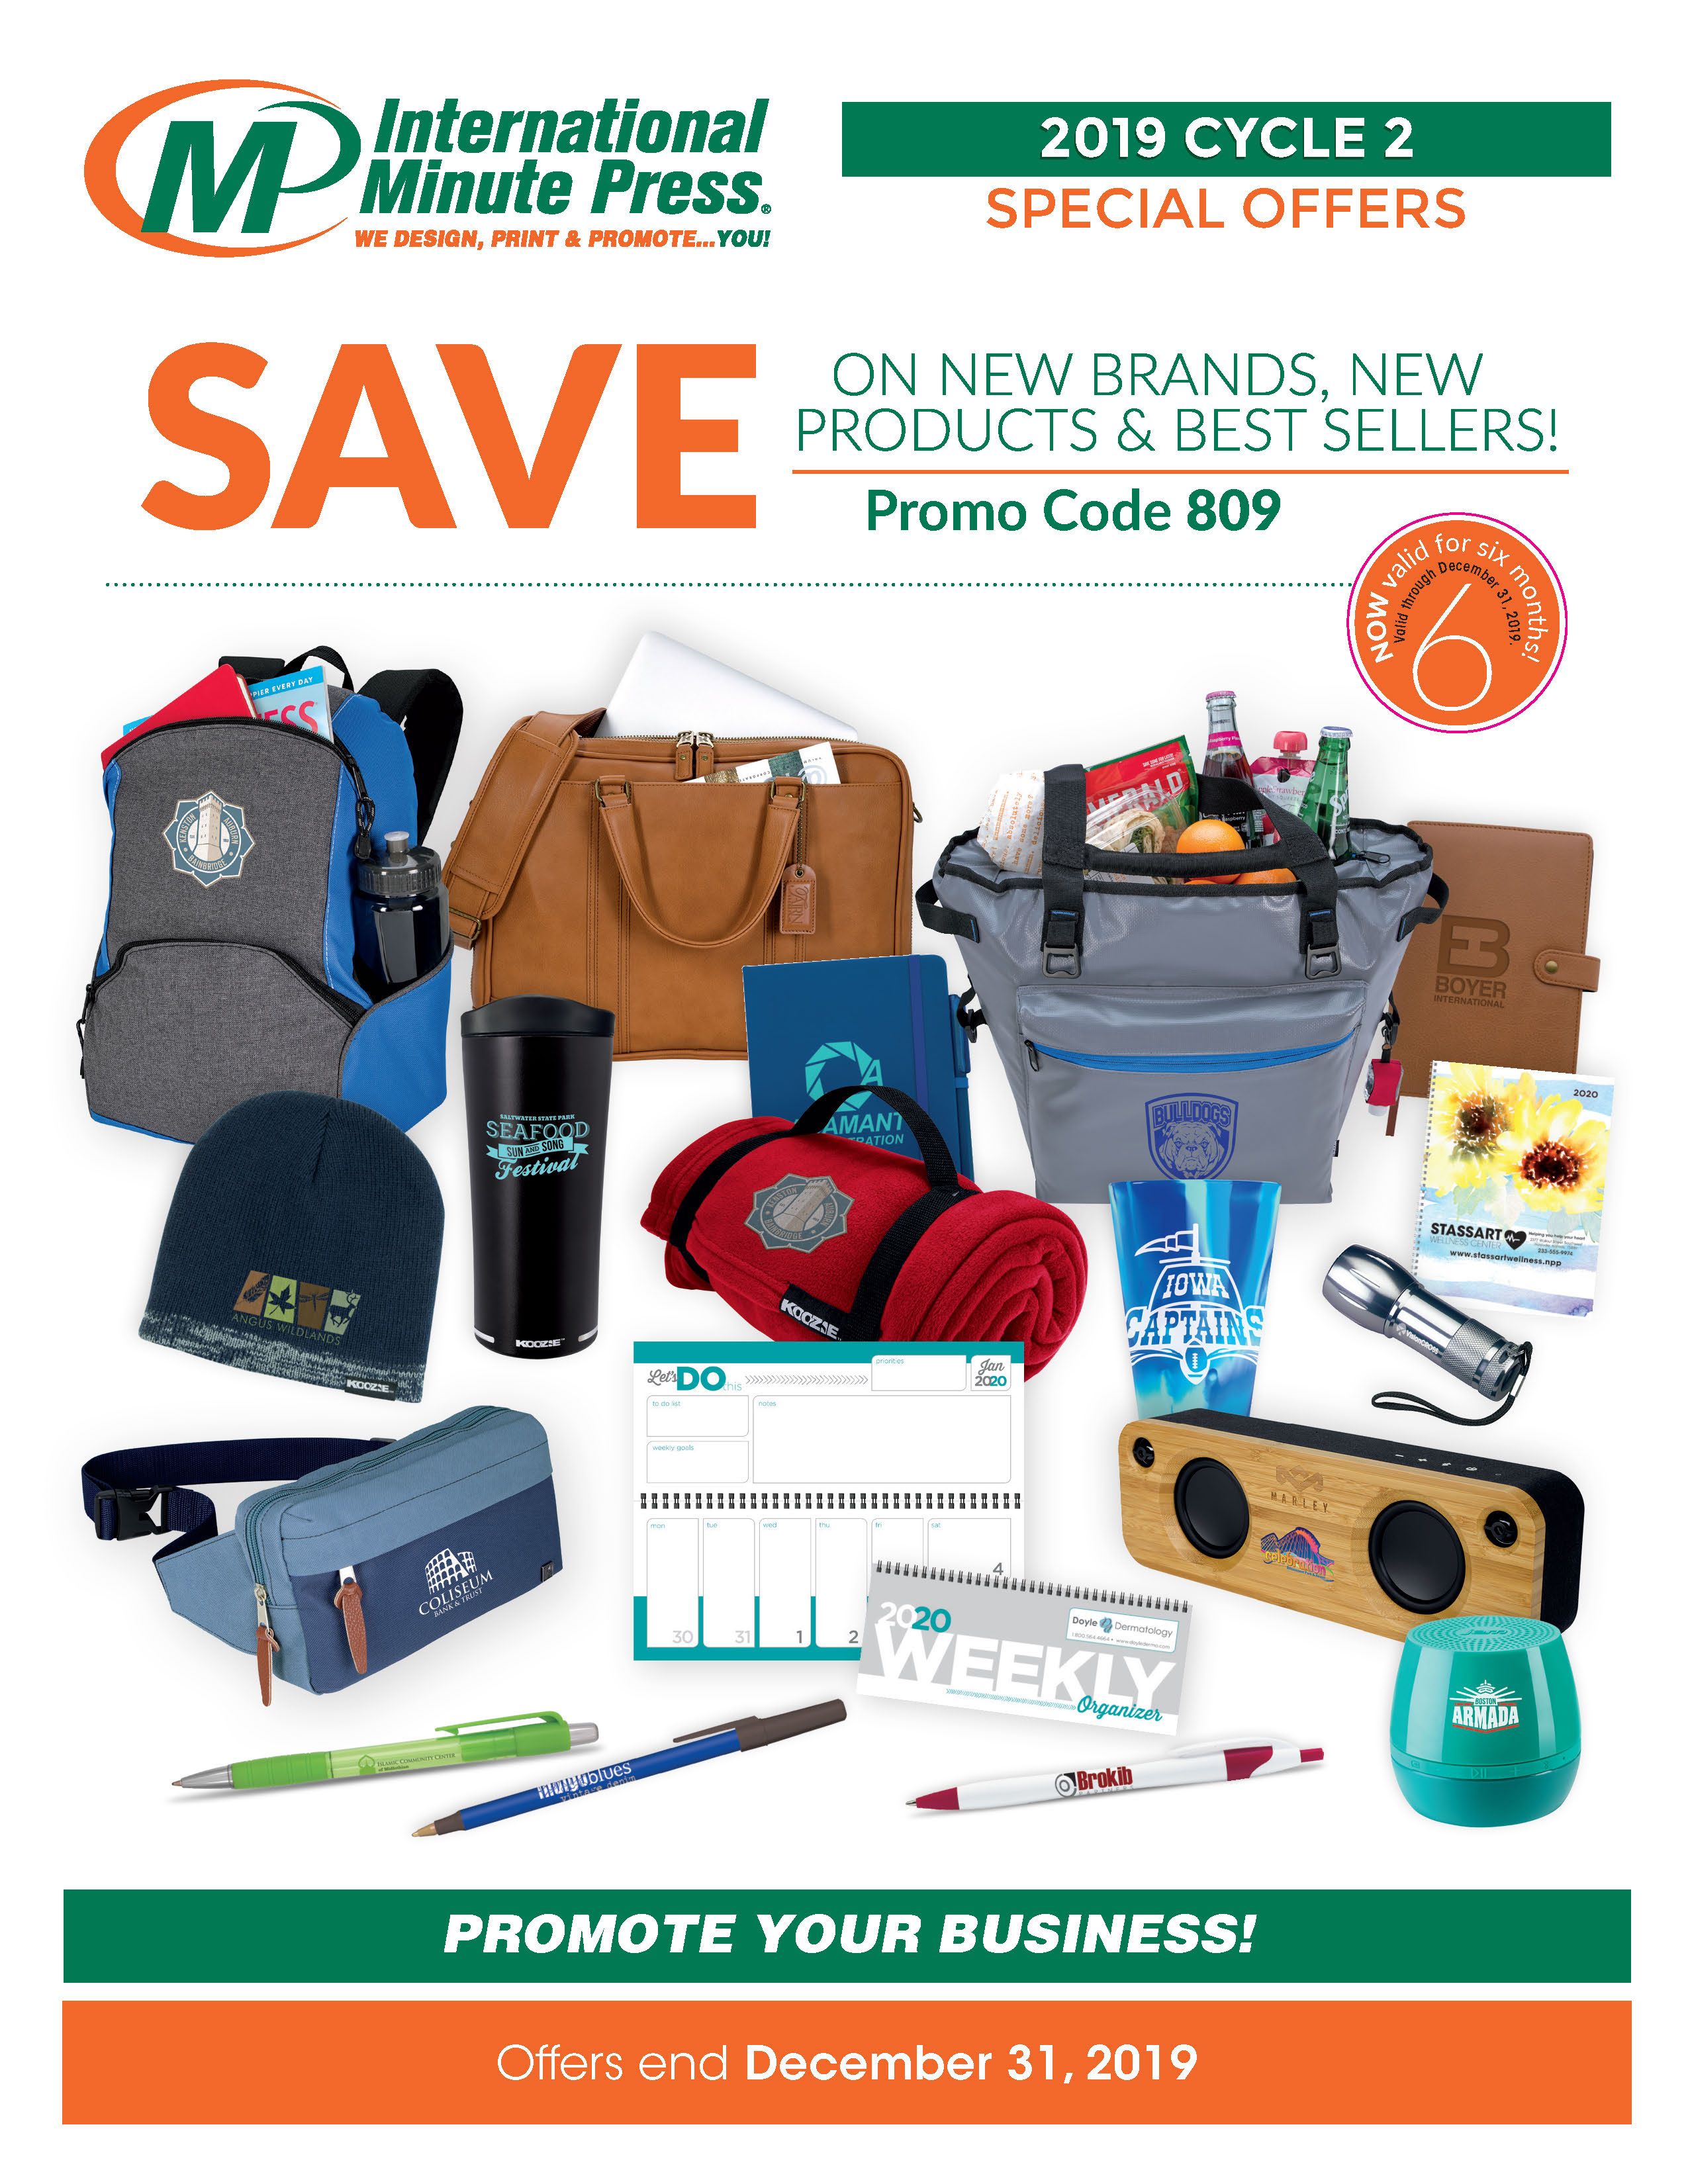 Promotional product offers